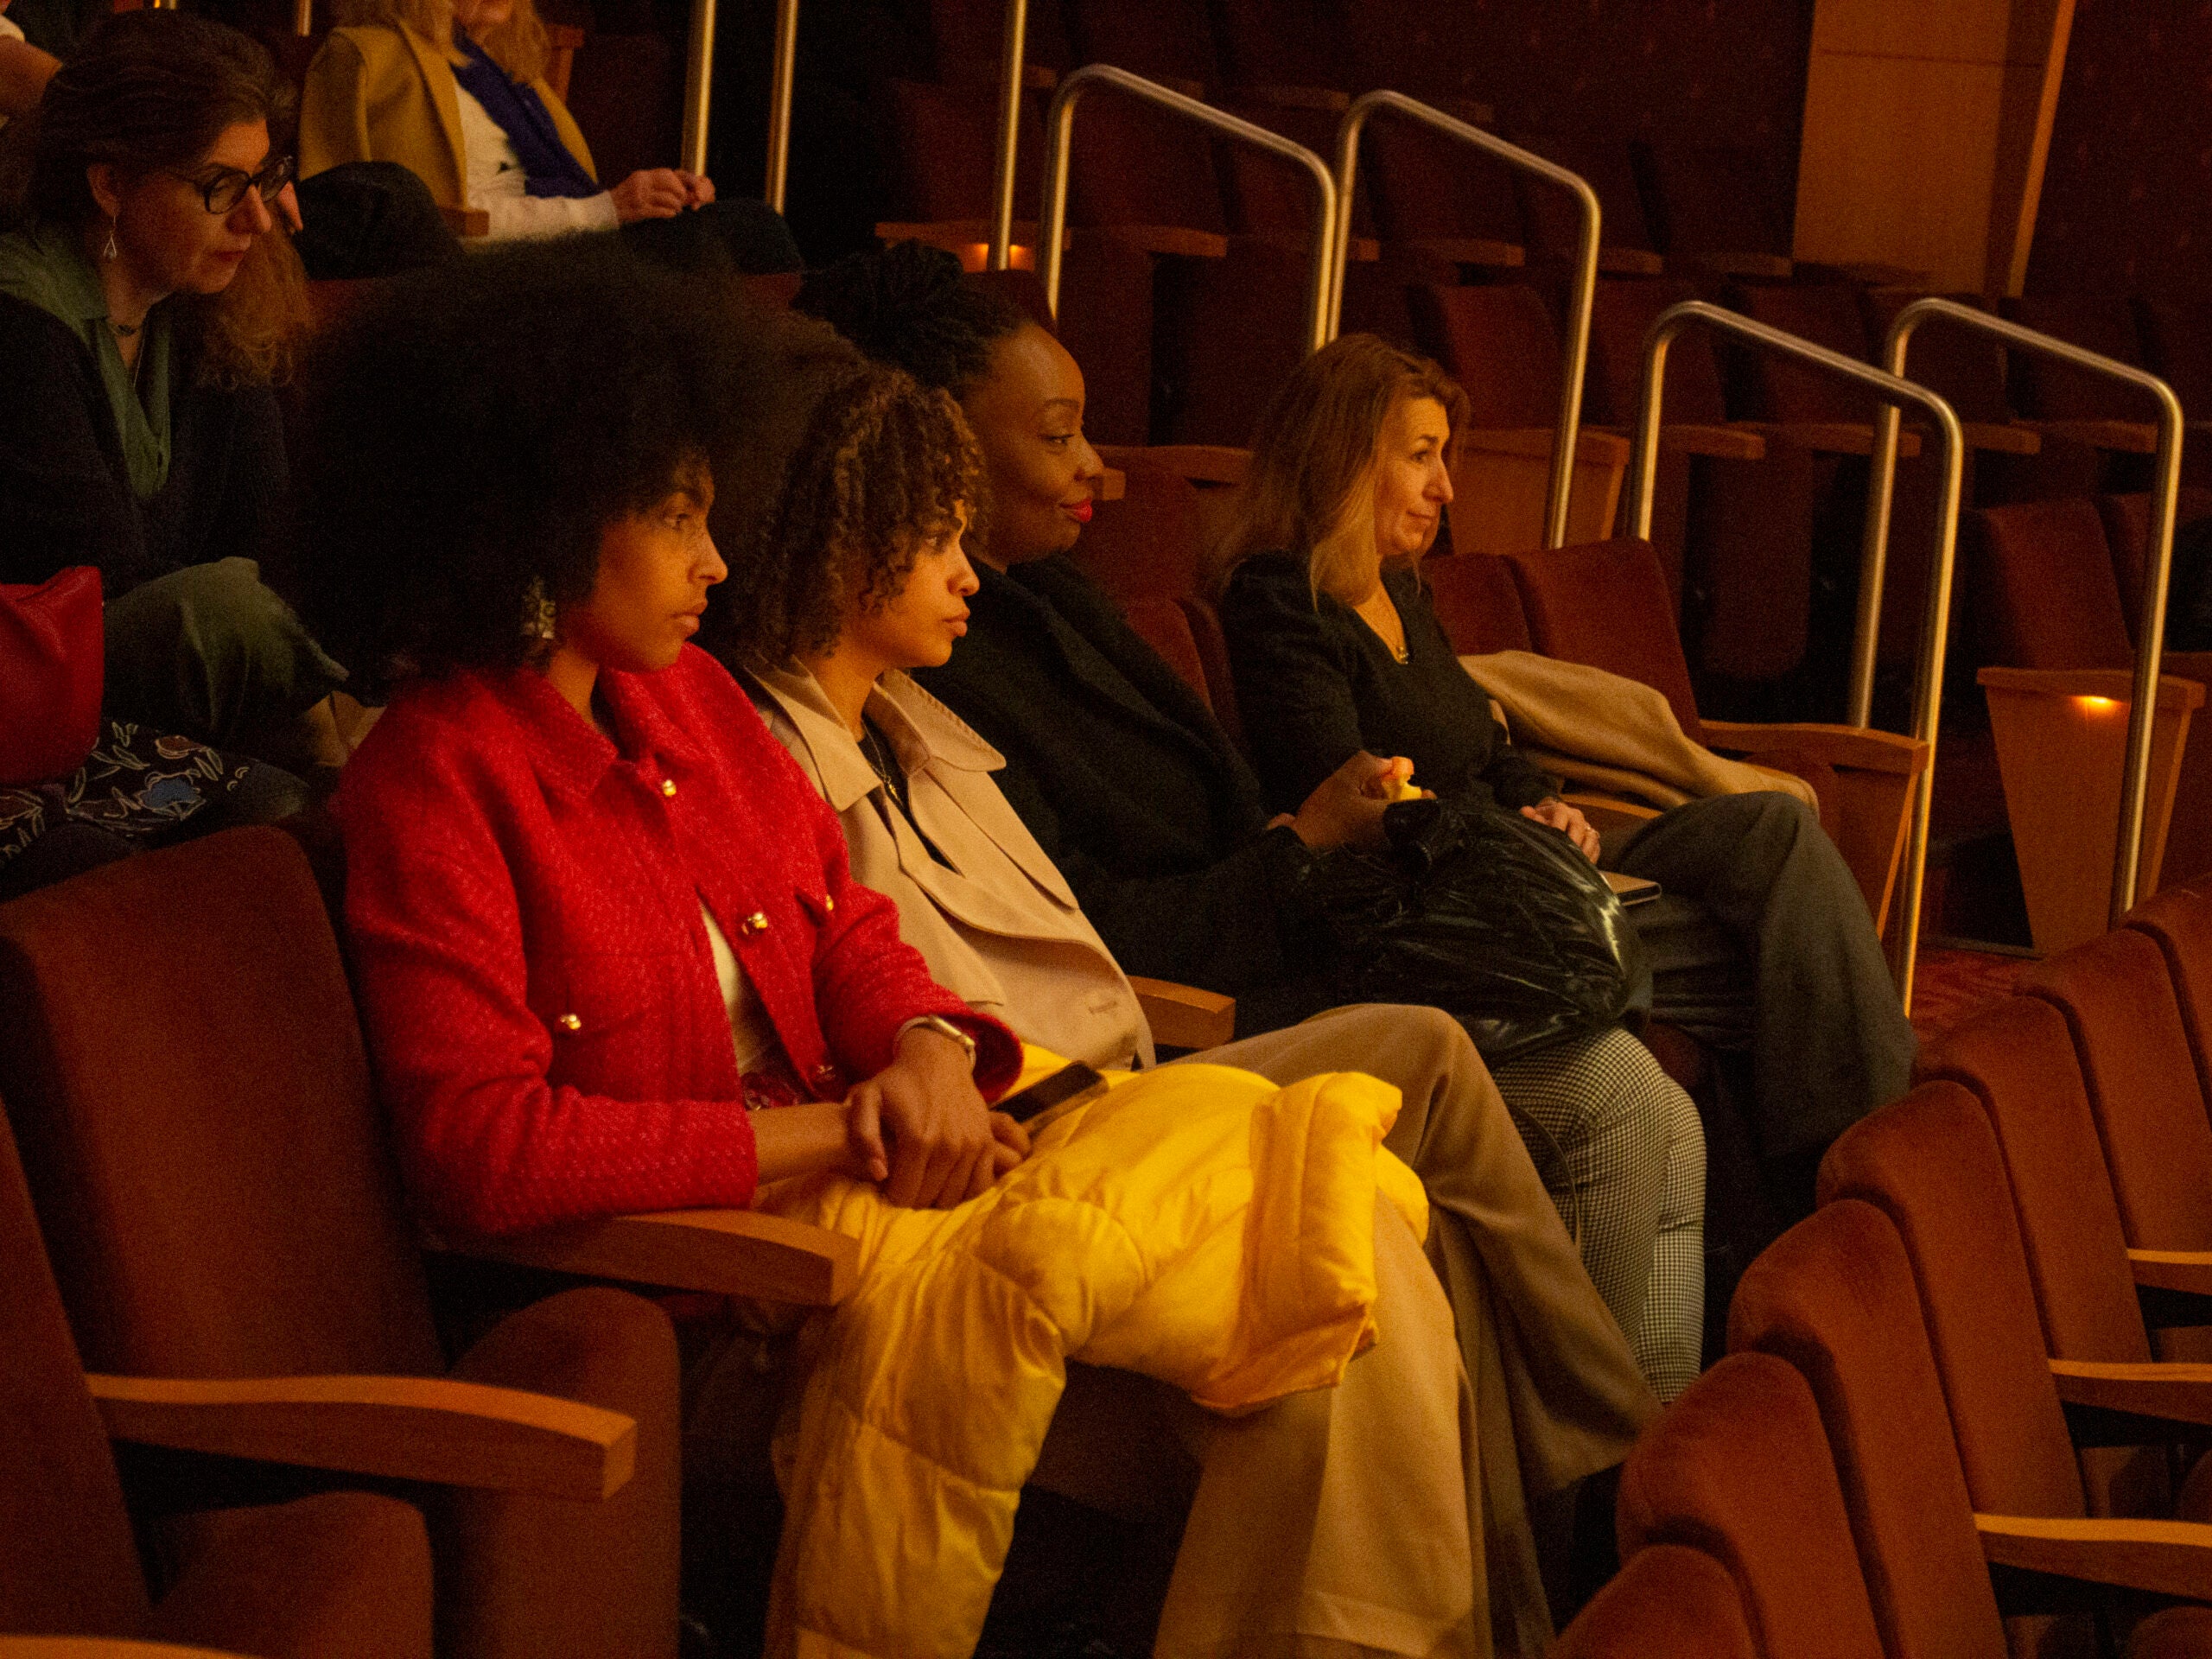 Four women are seated together in a lighted auditorium. They are watching the Q+A discussion.